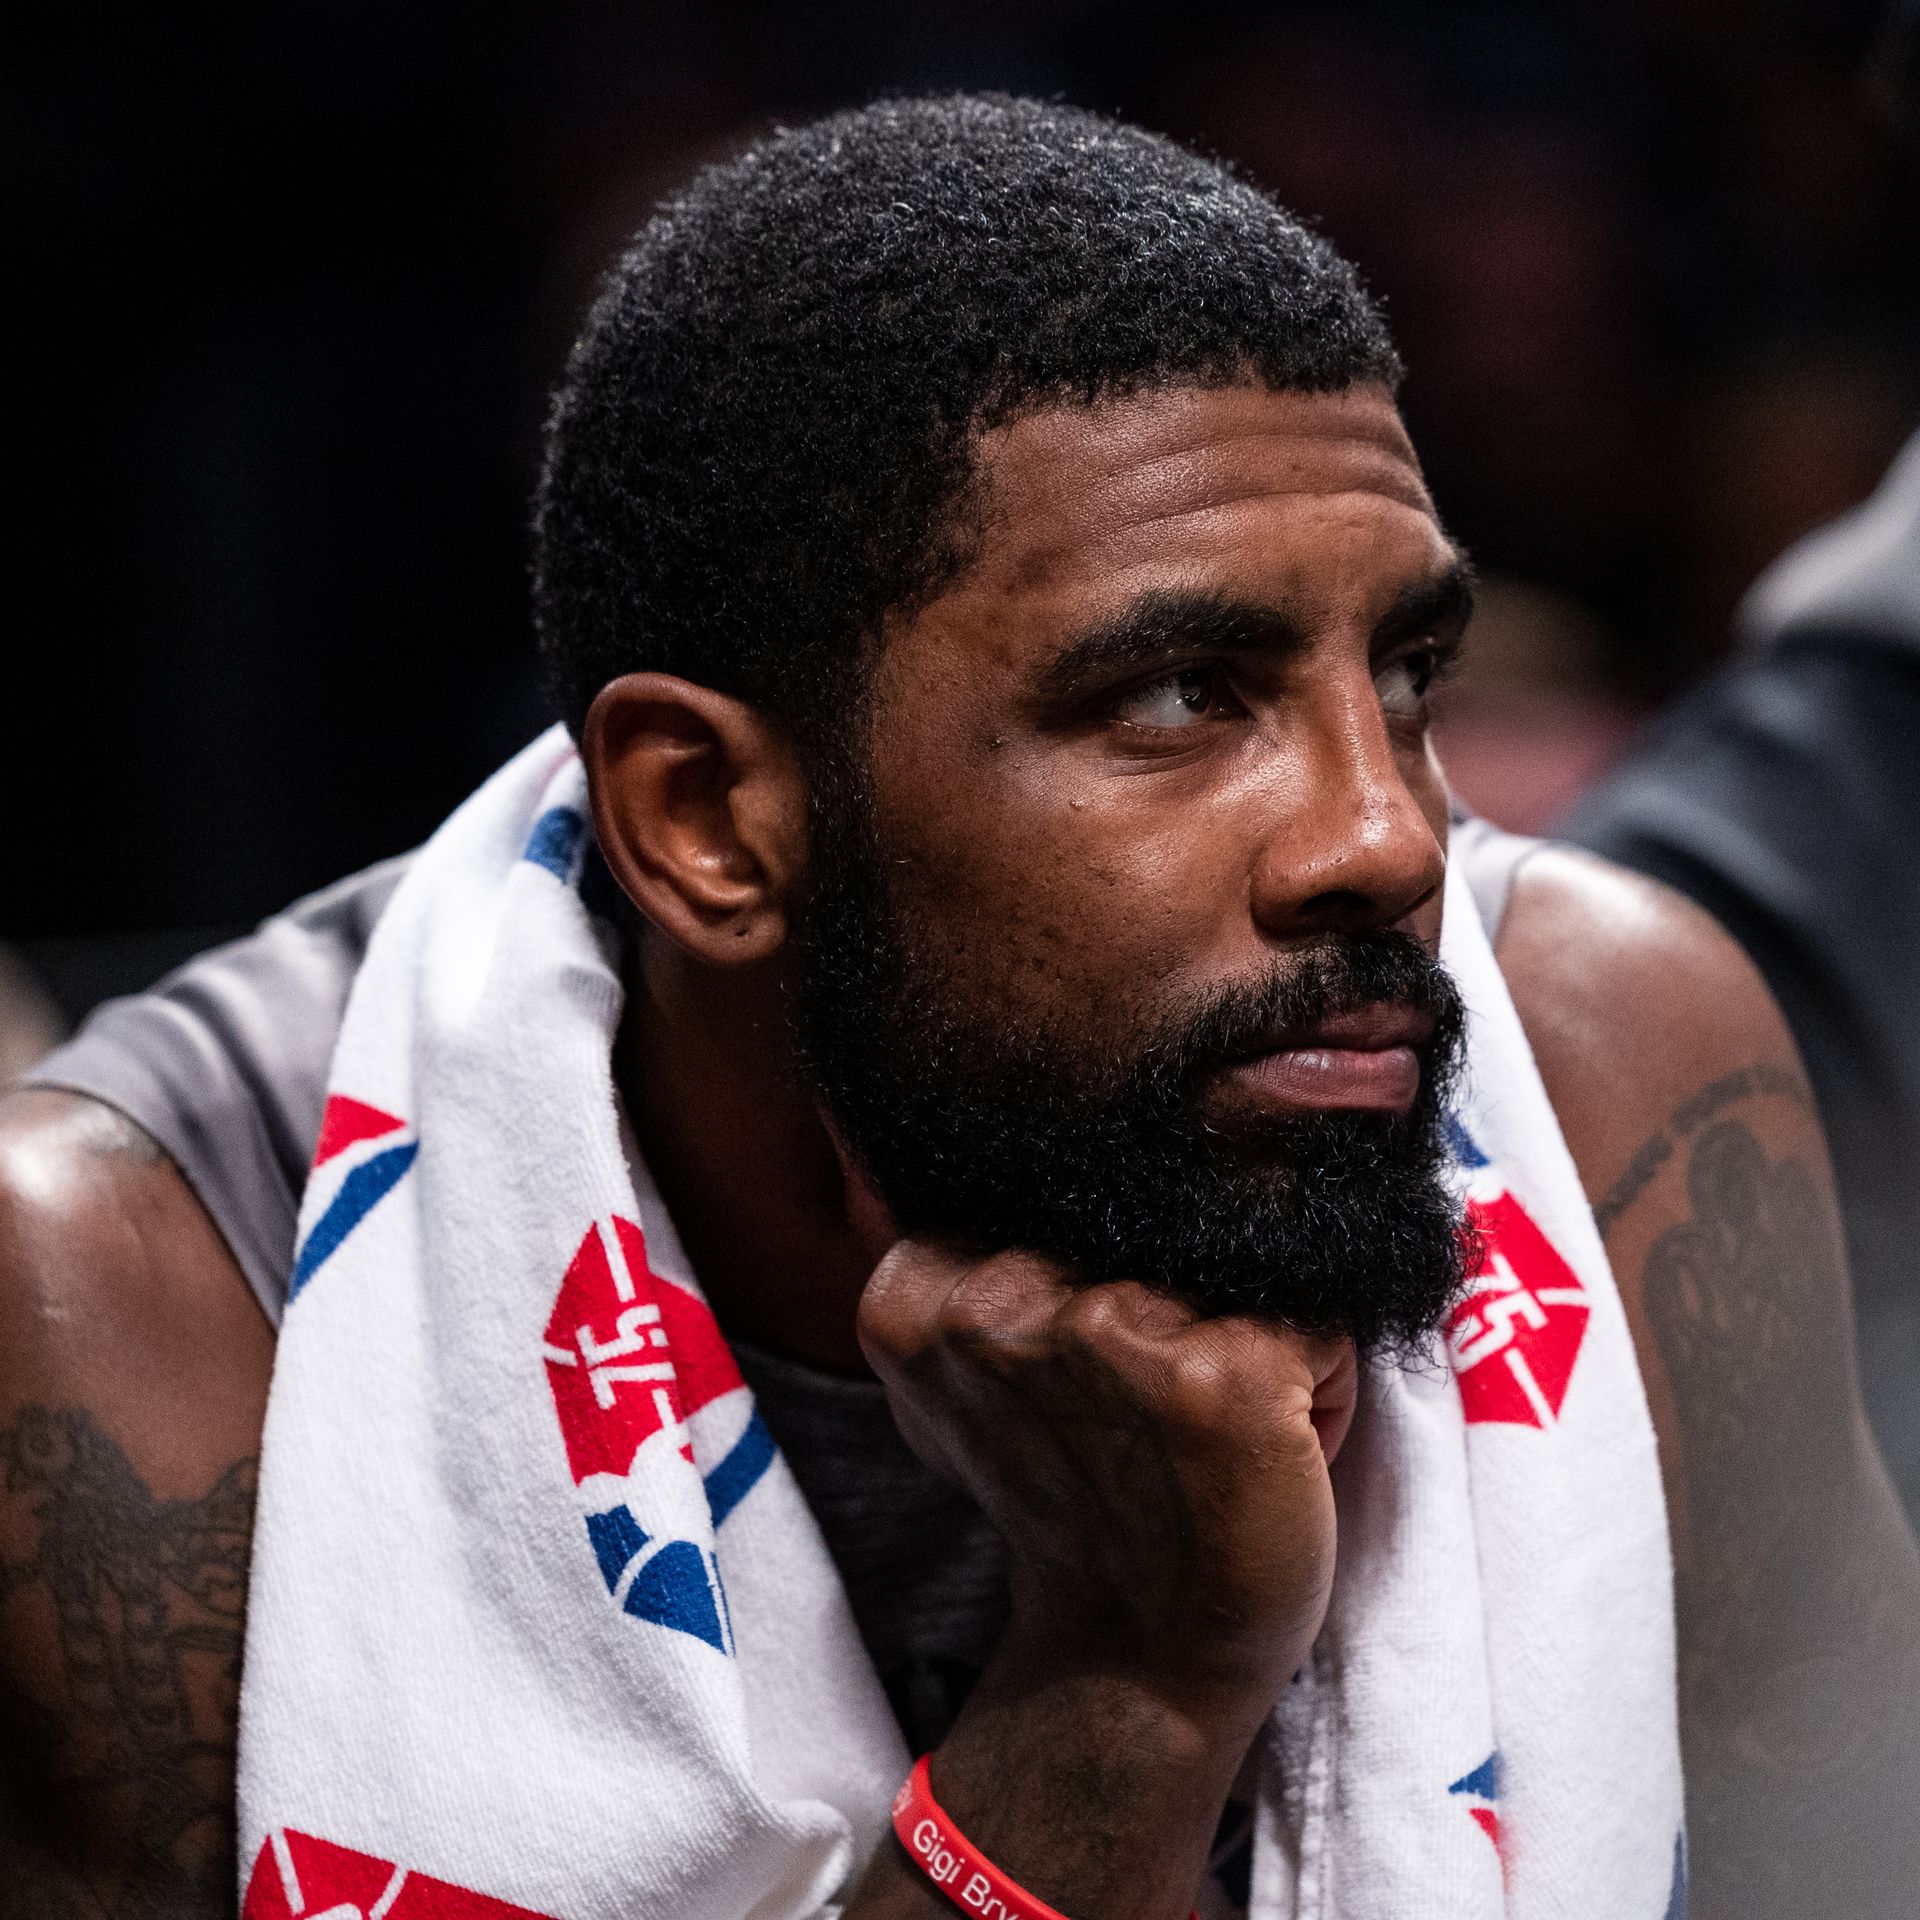 Kyrie Irving's first press conference in a Nets jersey: This